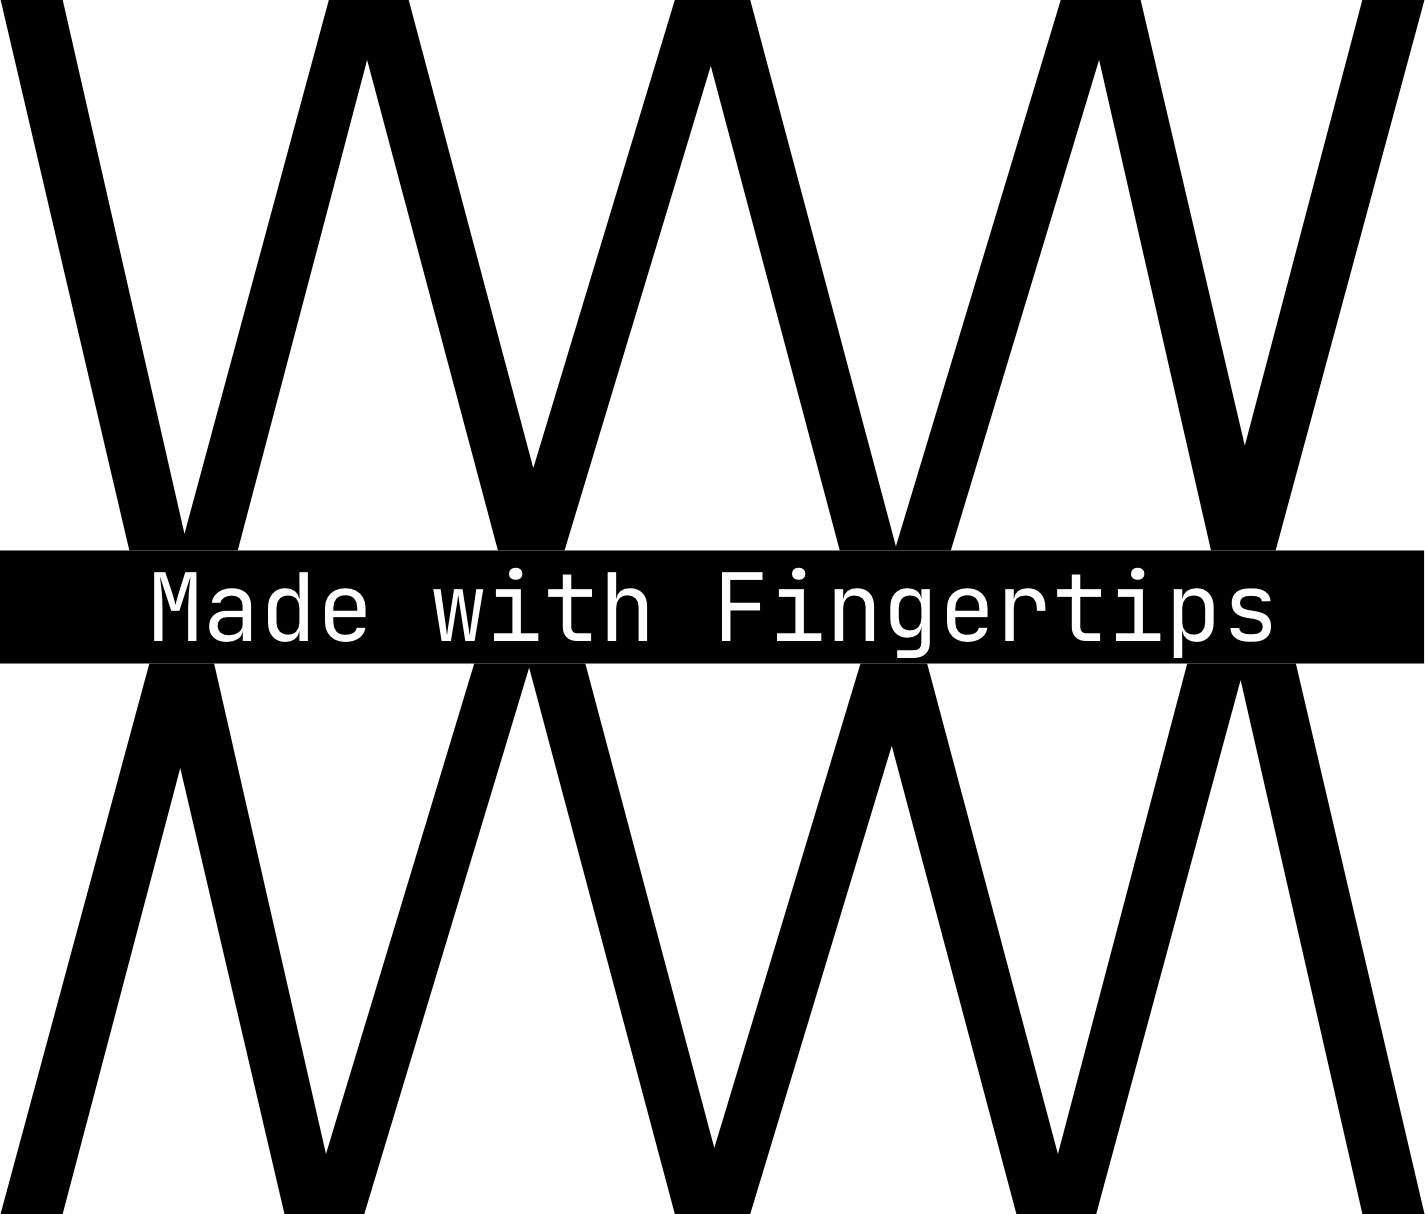 Made With Fingertips